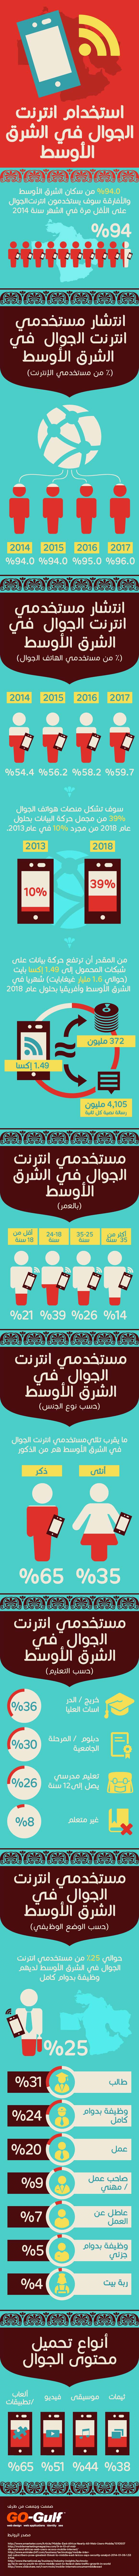 Mobile Internet Usage in the Middle East - Editable